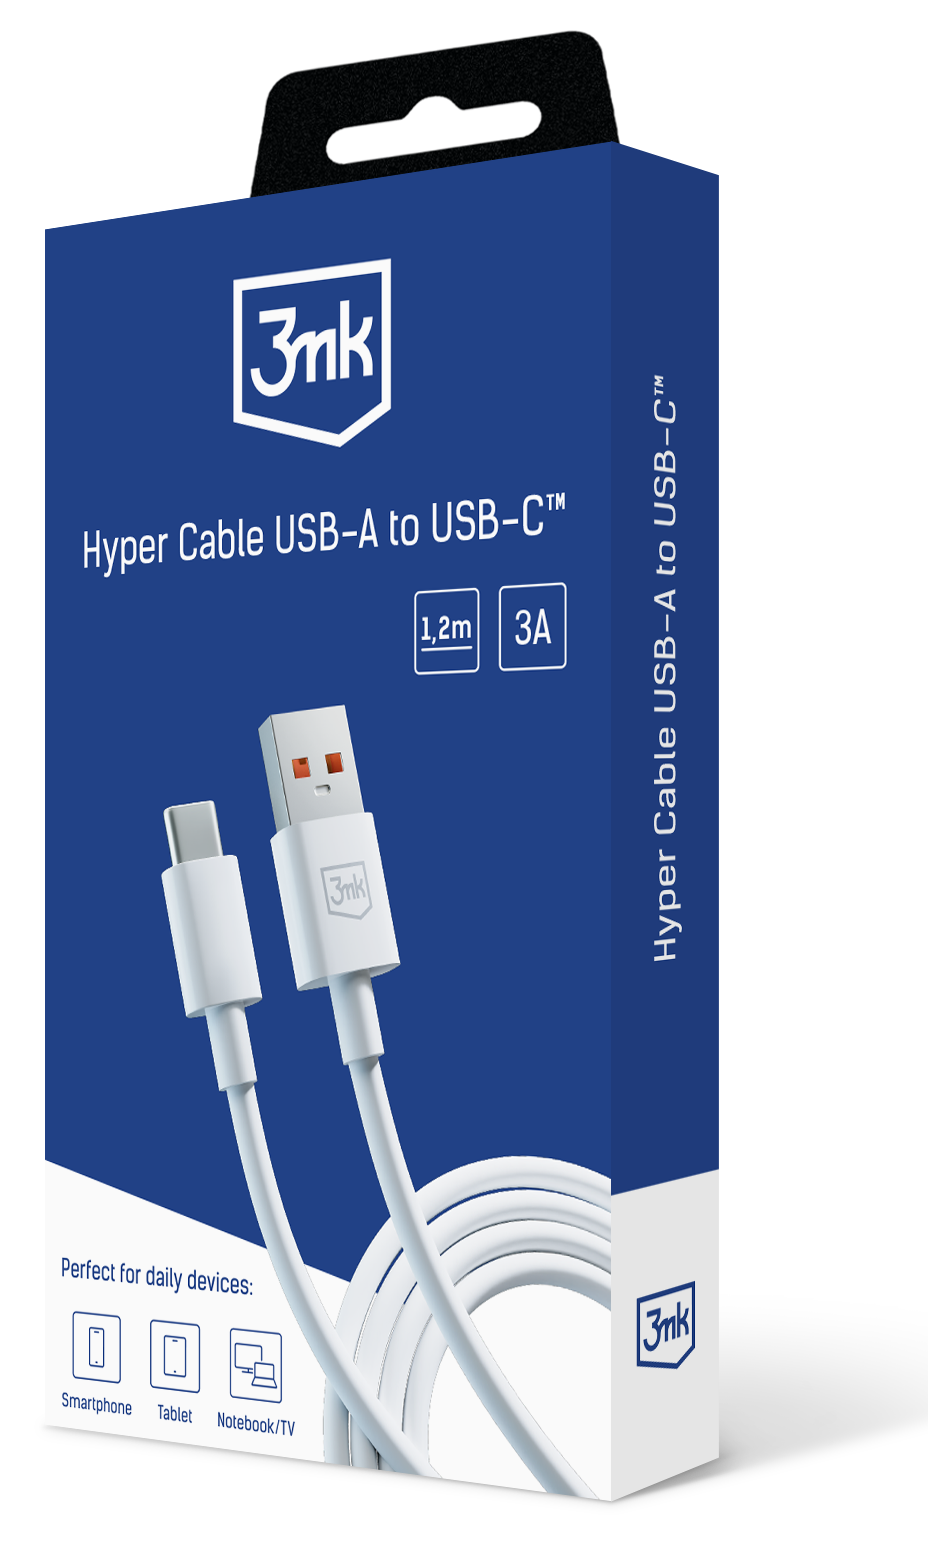 3mk-hyper-cable-A-to-C_white-packshot-b